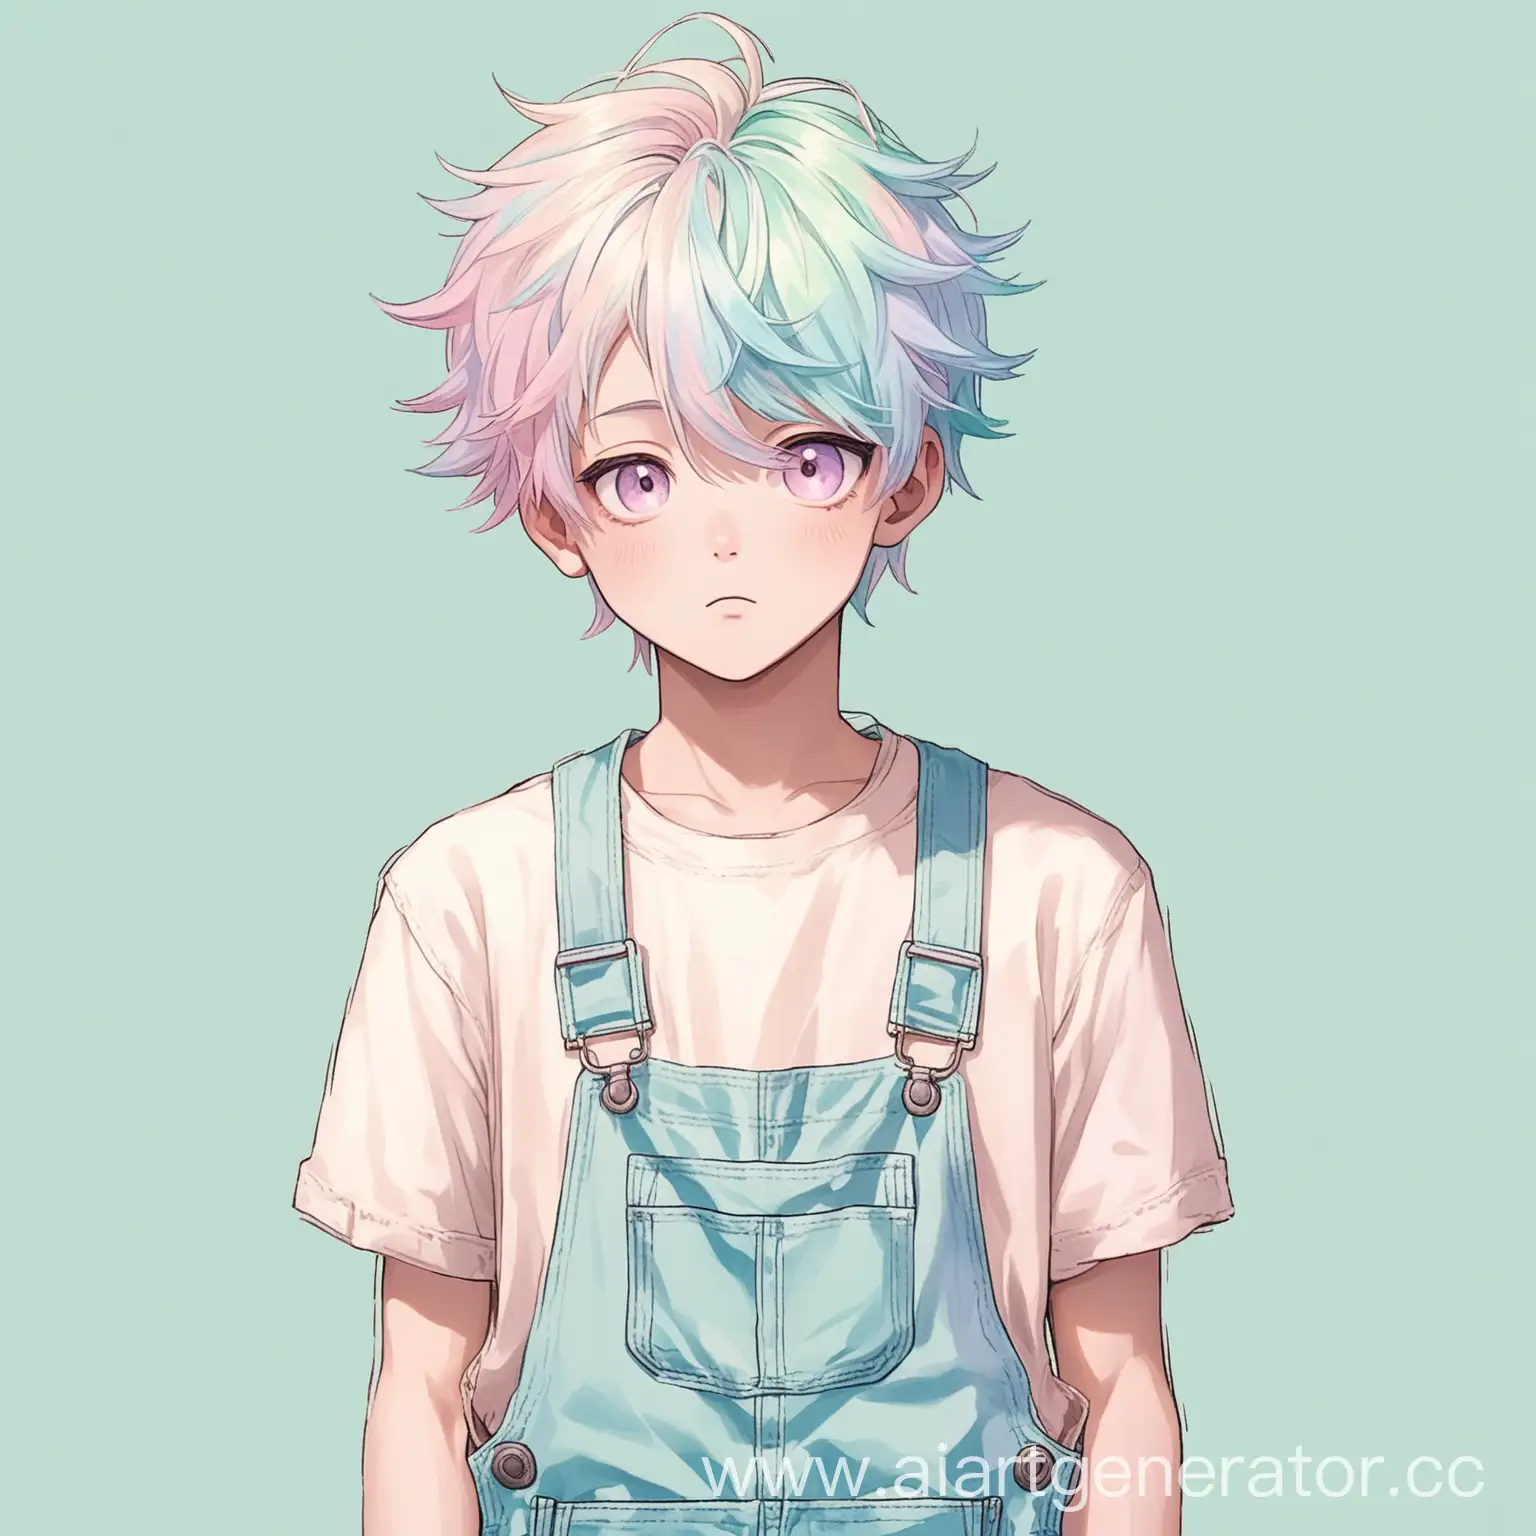 Colorful-Boy-in-Overalls-with-Pastel-Hair-Tones